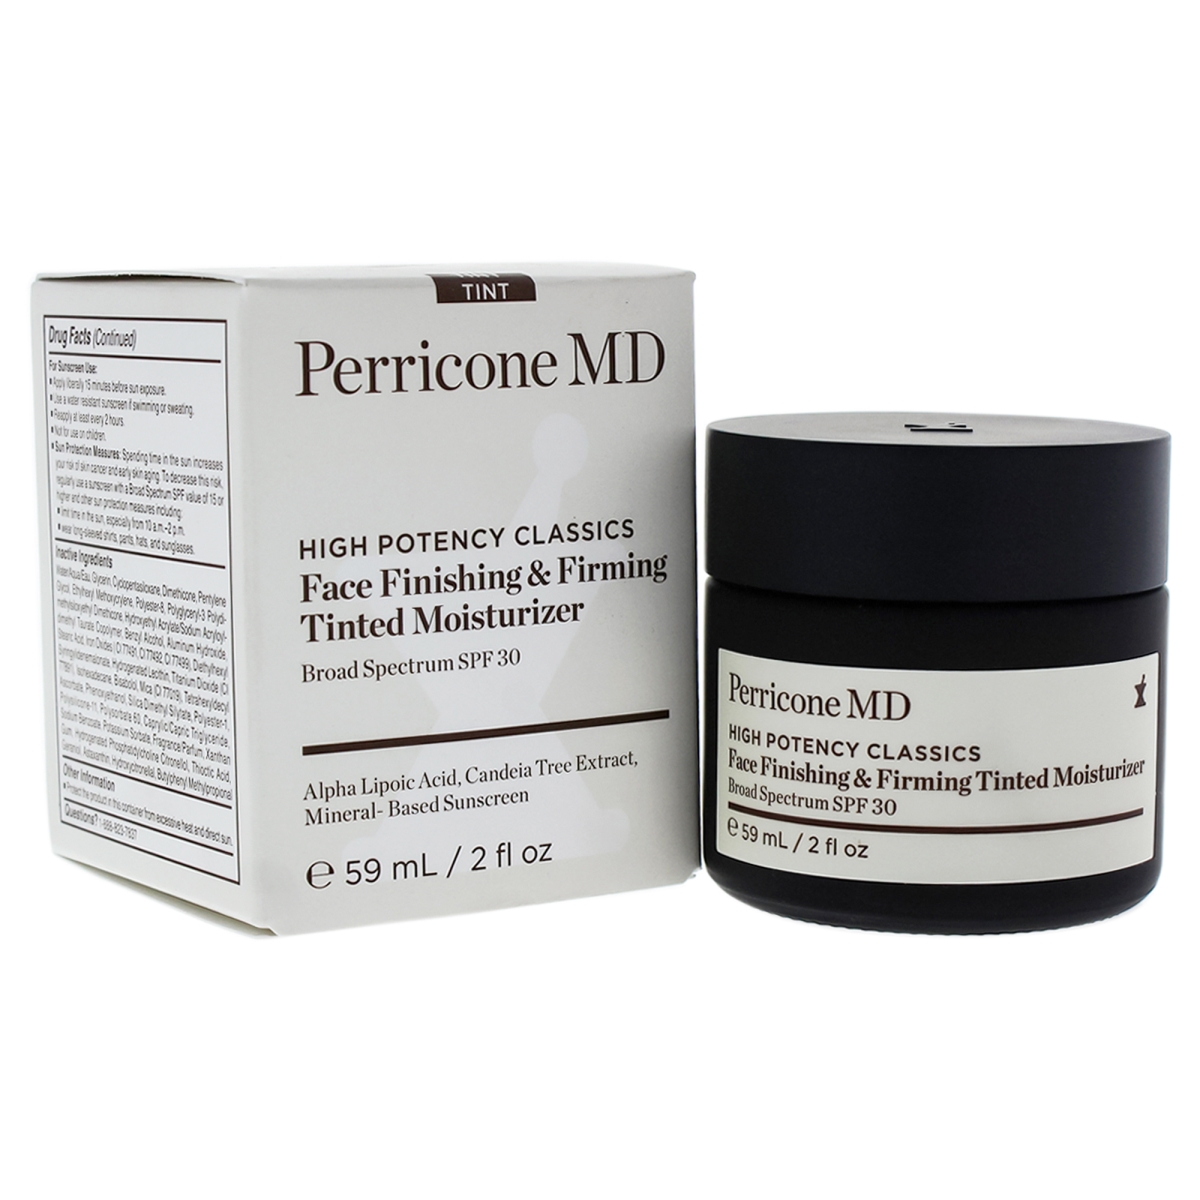 I0087941 High Potency Classics Face Finishing & Firming Tinted Moisturizer Spf 30 For Unisex - 2 Oz